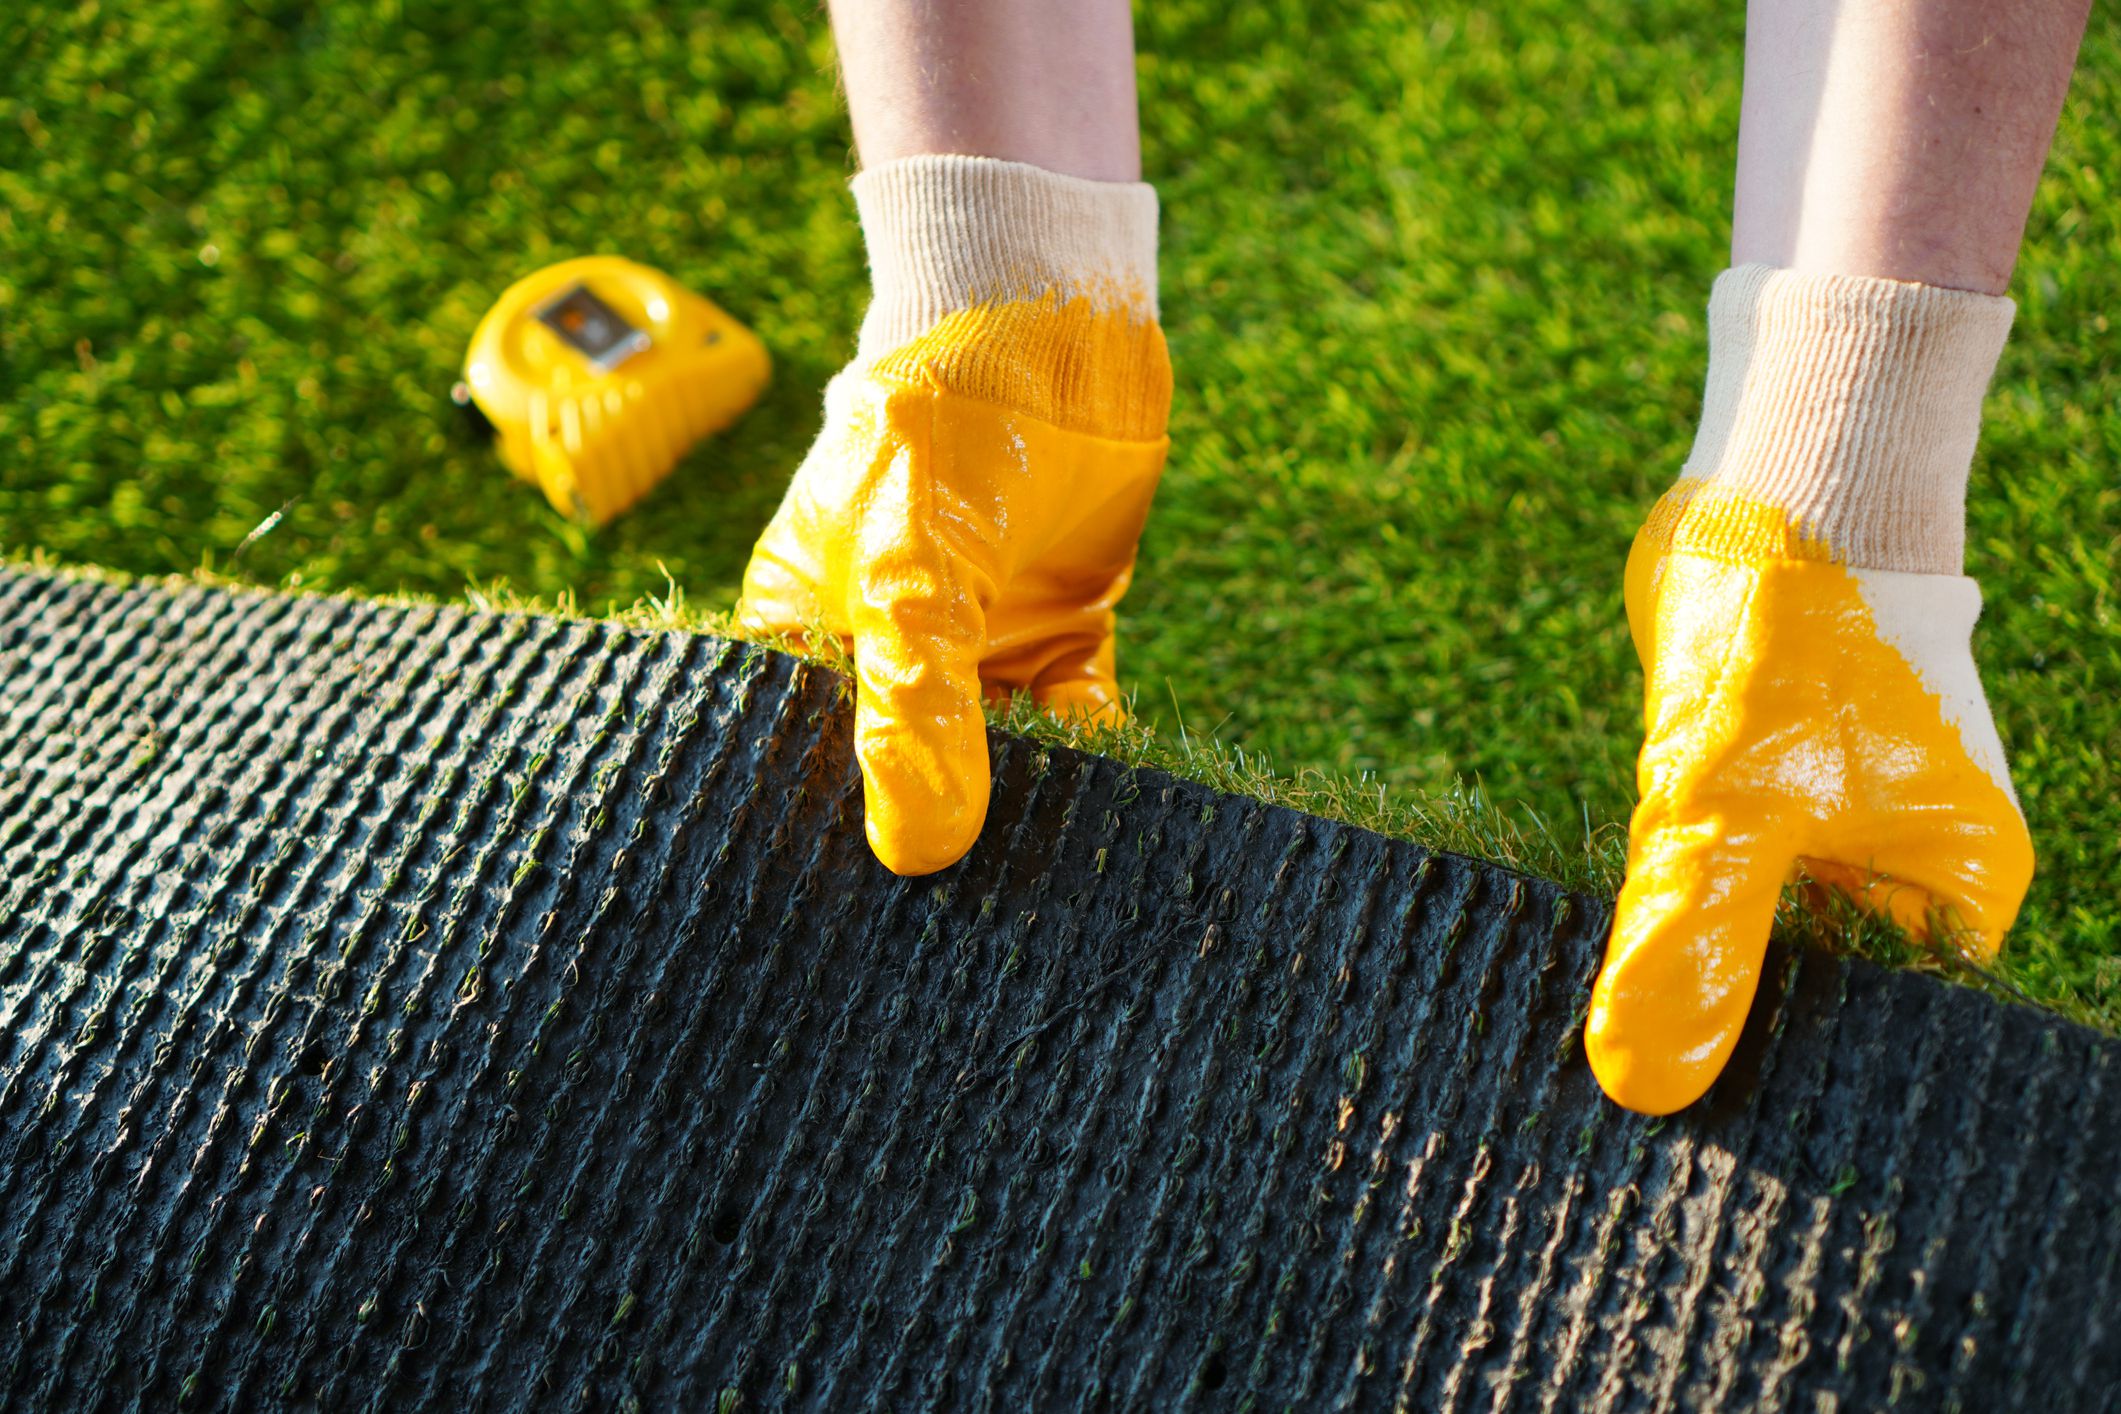 Artificial Turf Versus Real Grass: Which Is Greener?